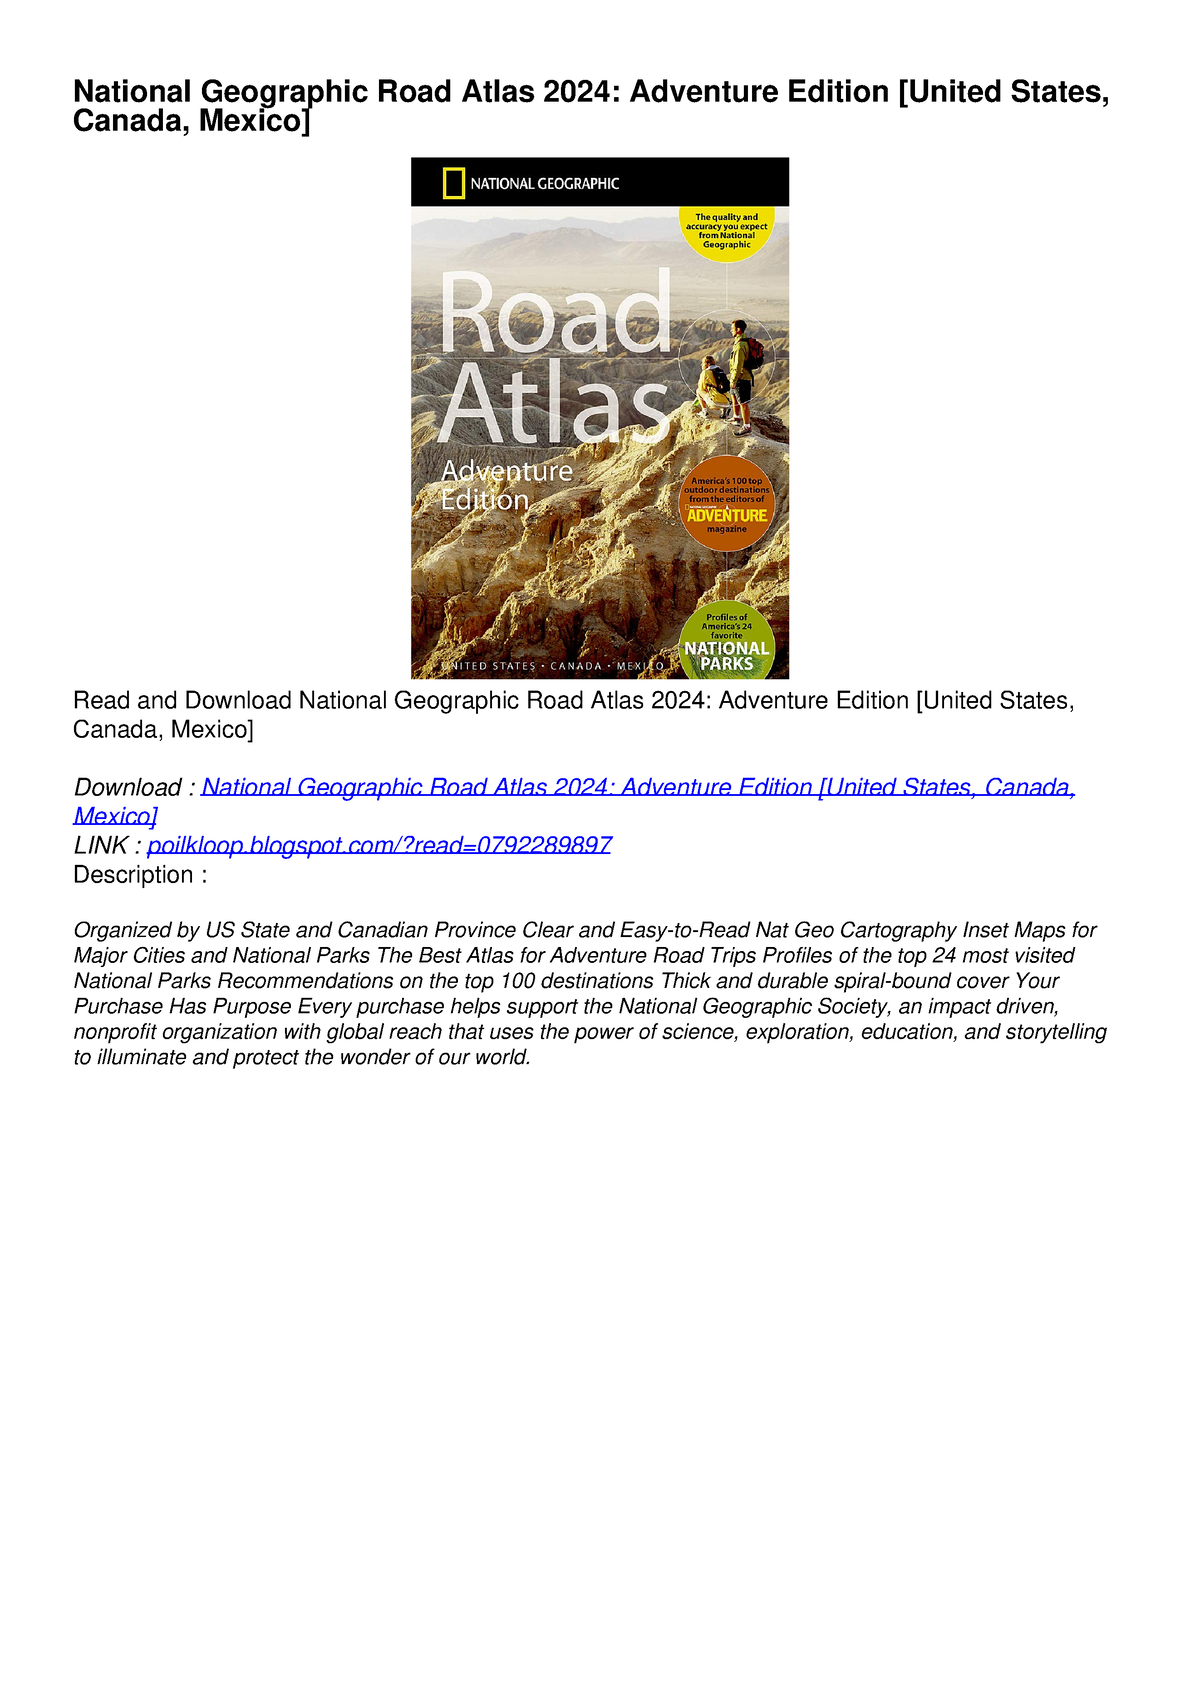 [PDF] DOWNLOAD FREE National Geographic Road Atlas 2024 Adventure